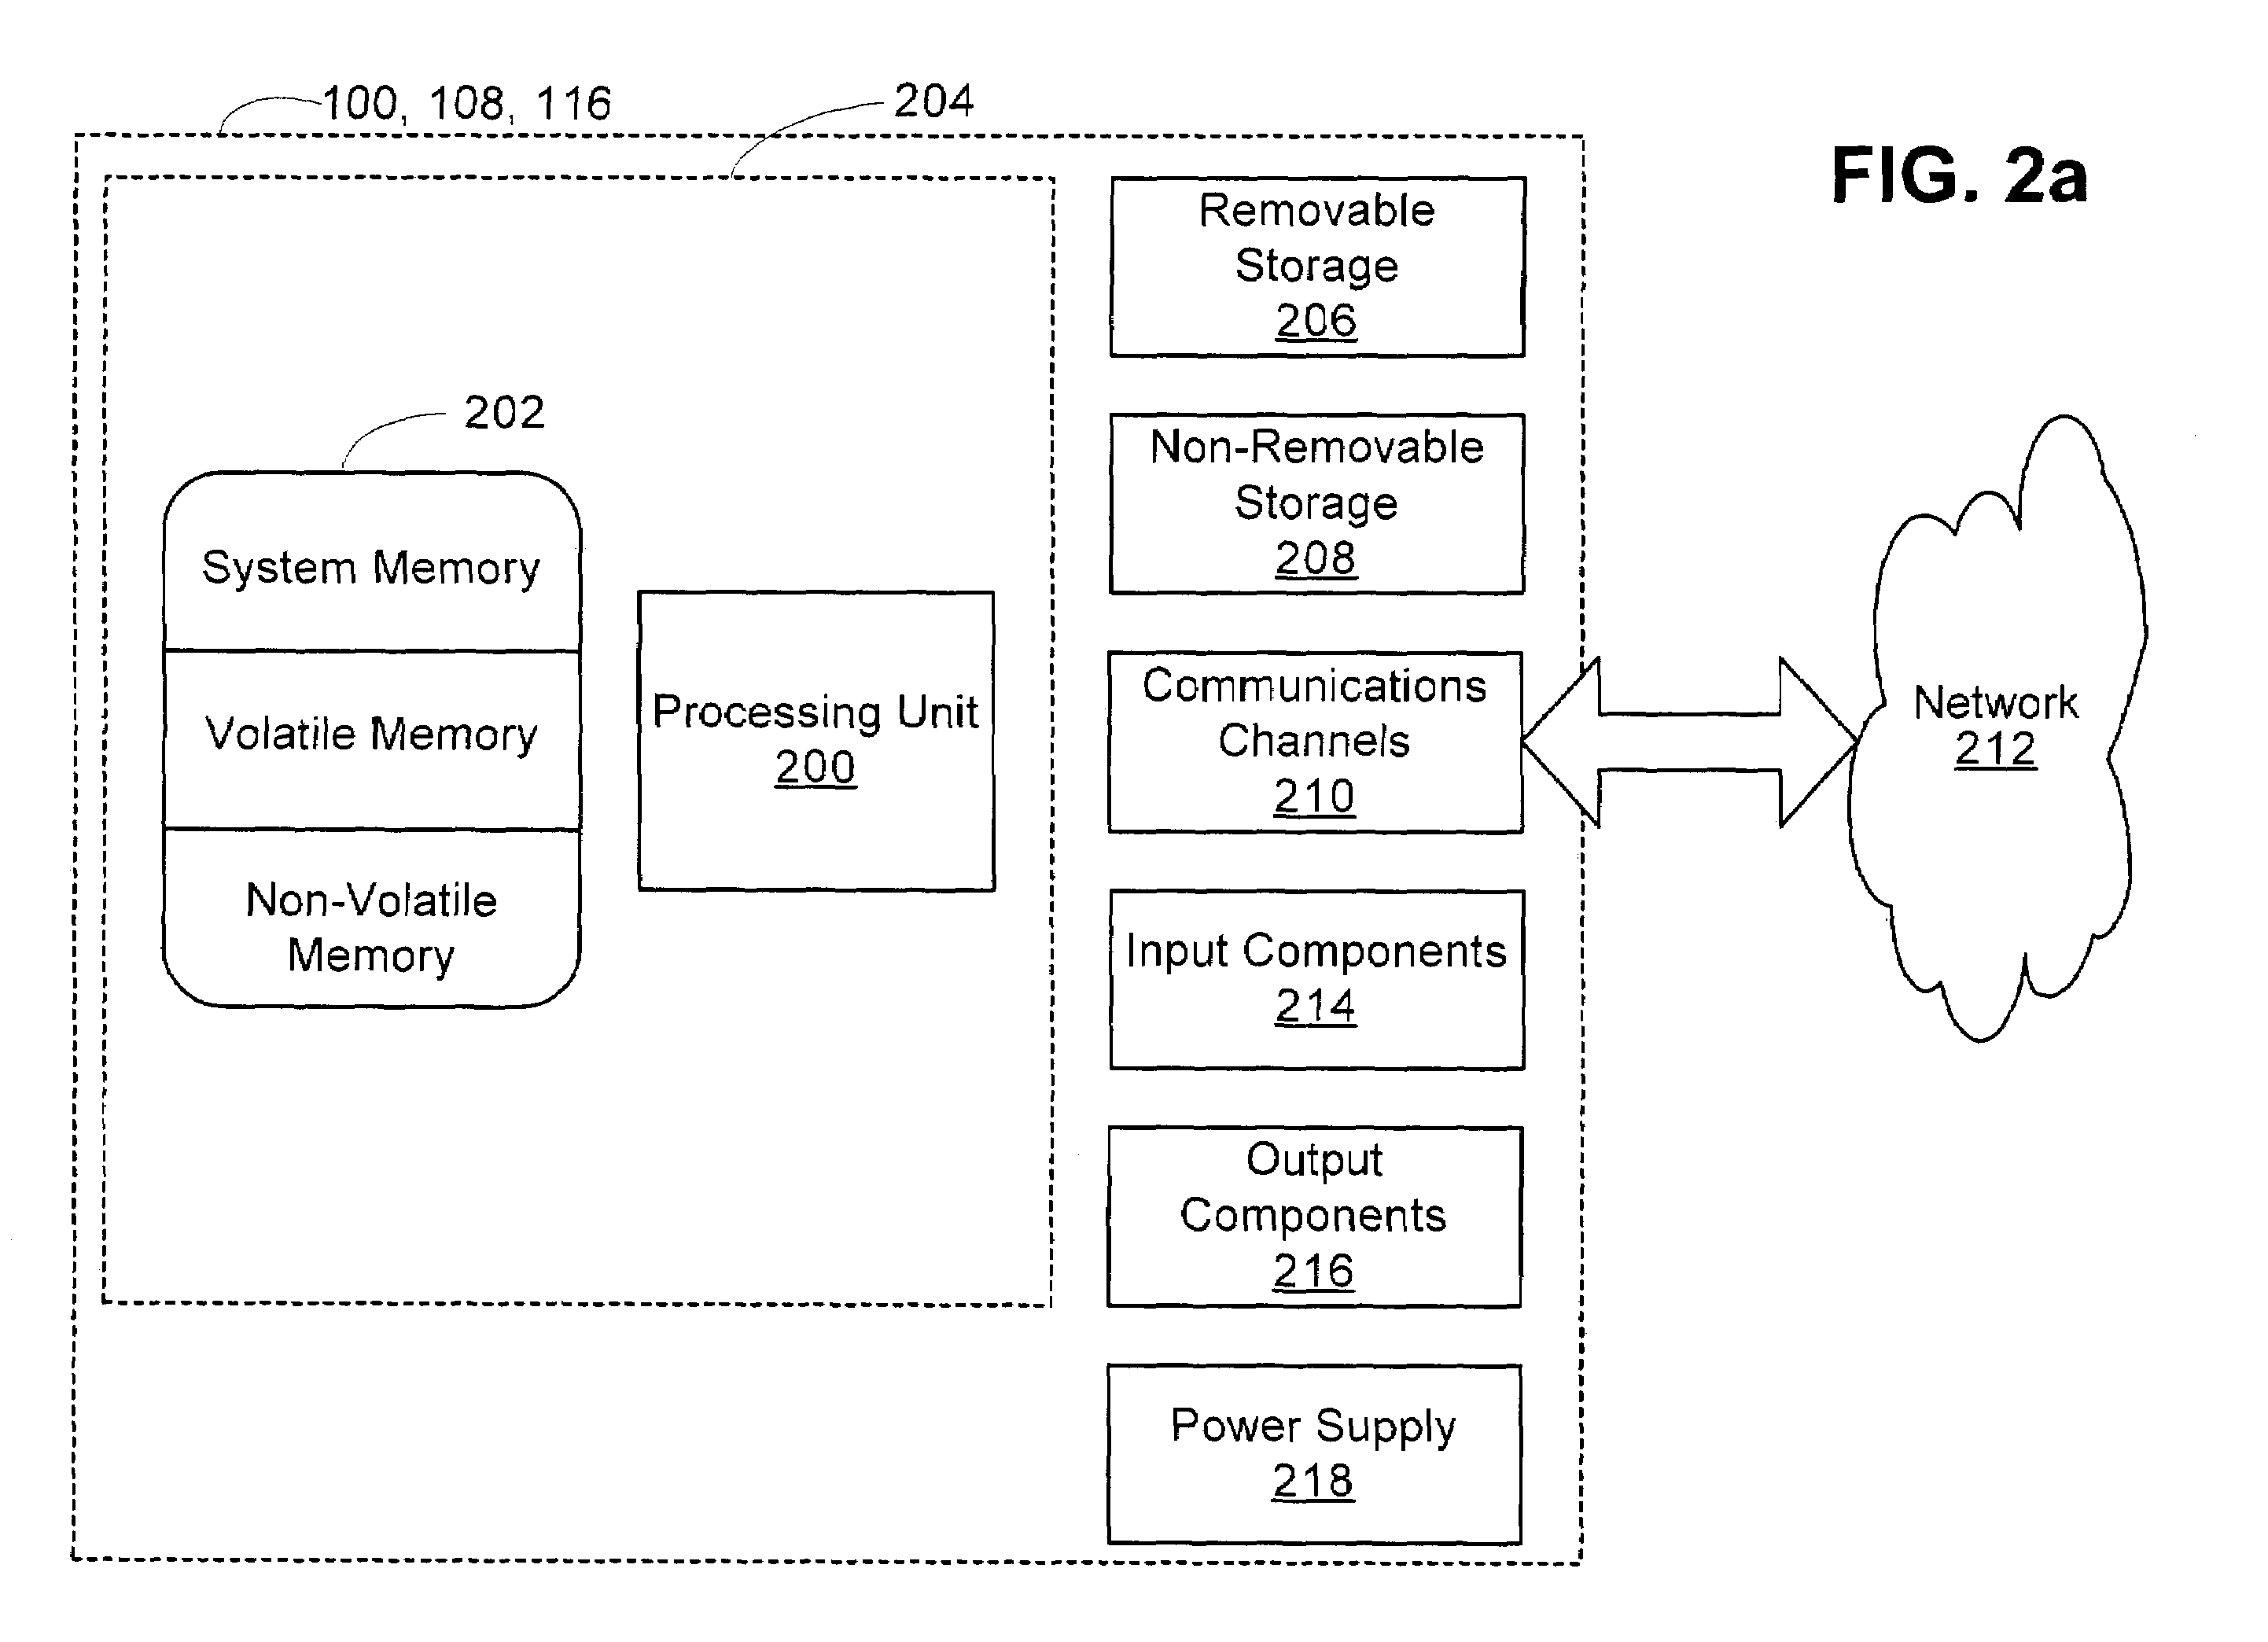 Method and system for providing a peripheral service to a host computing device